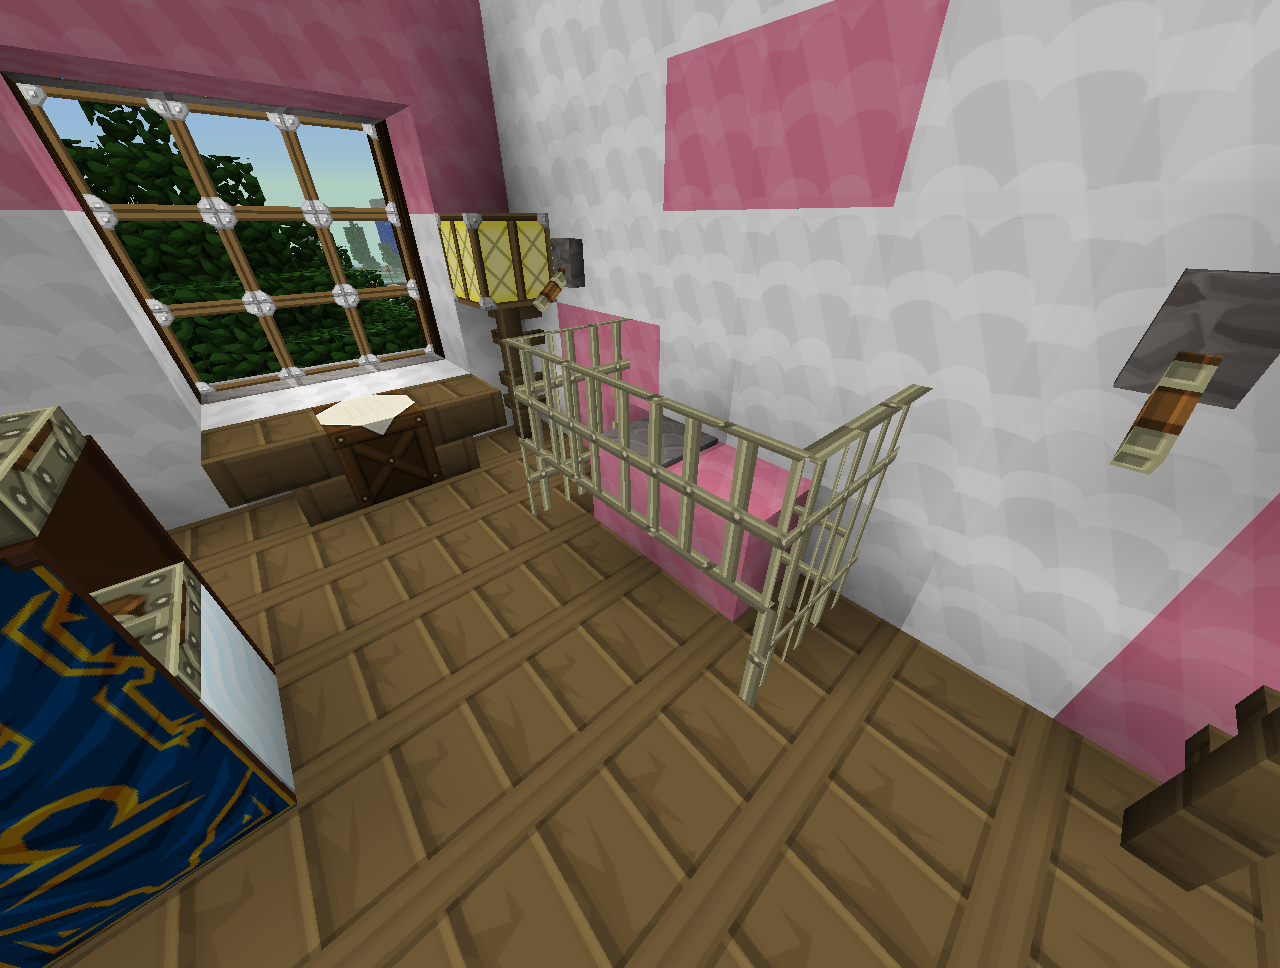 Minecraft Wallpaper For Your Bedroom On, How To Make A Good Bedroom In Minecraft